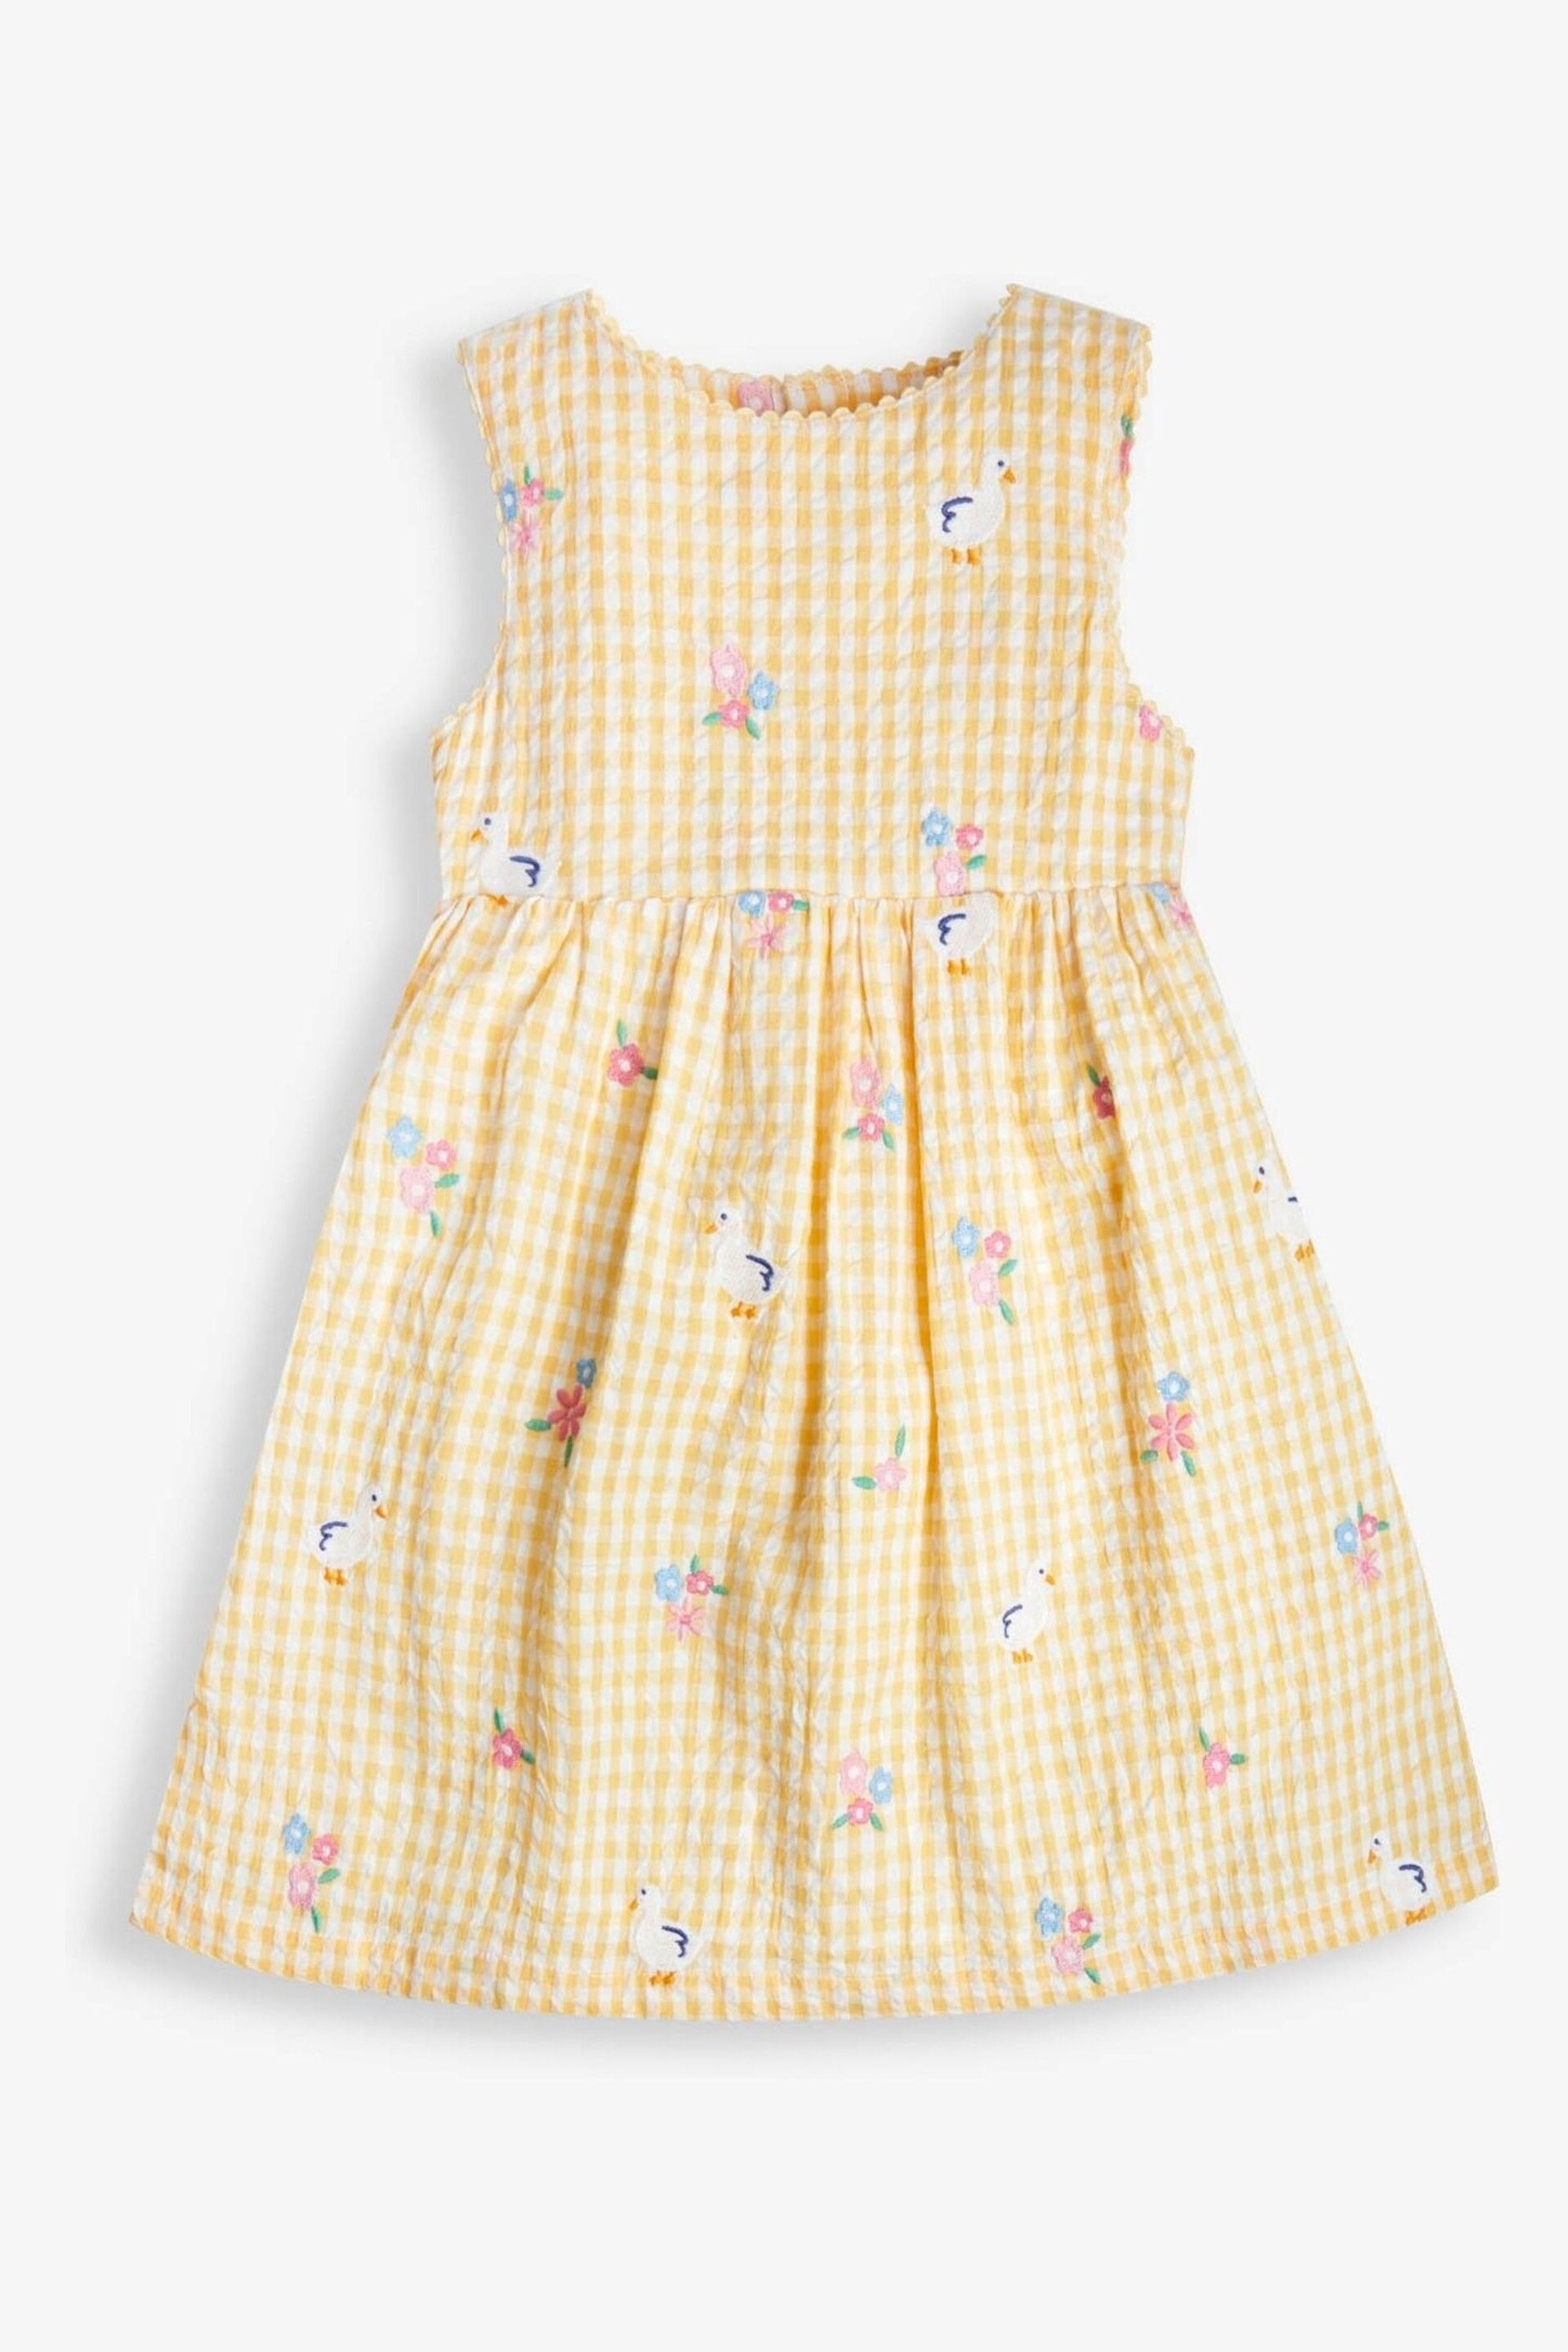 JoJo Maman Bébé Yellow Gingham Duck Floral Embroidered Dress - Image 1 of 2